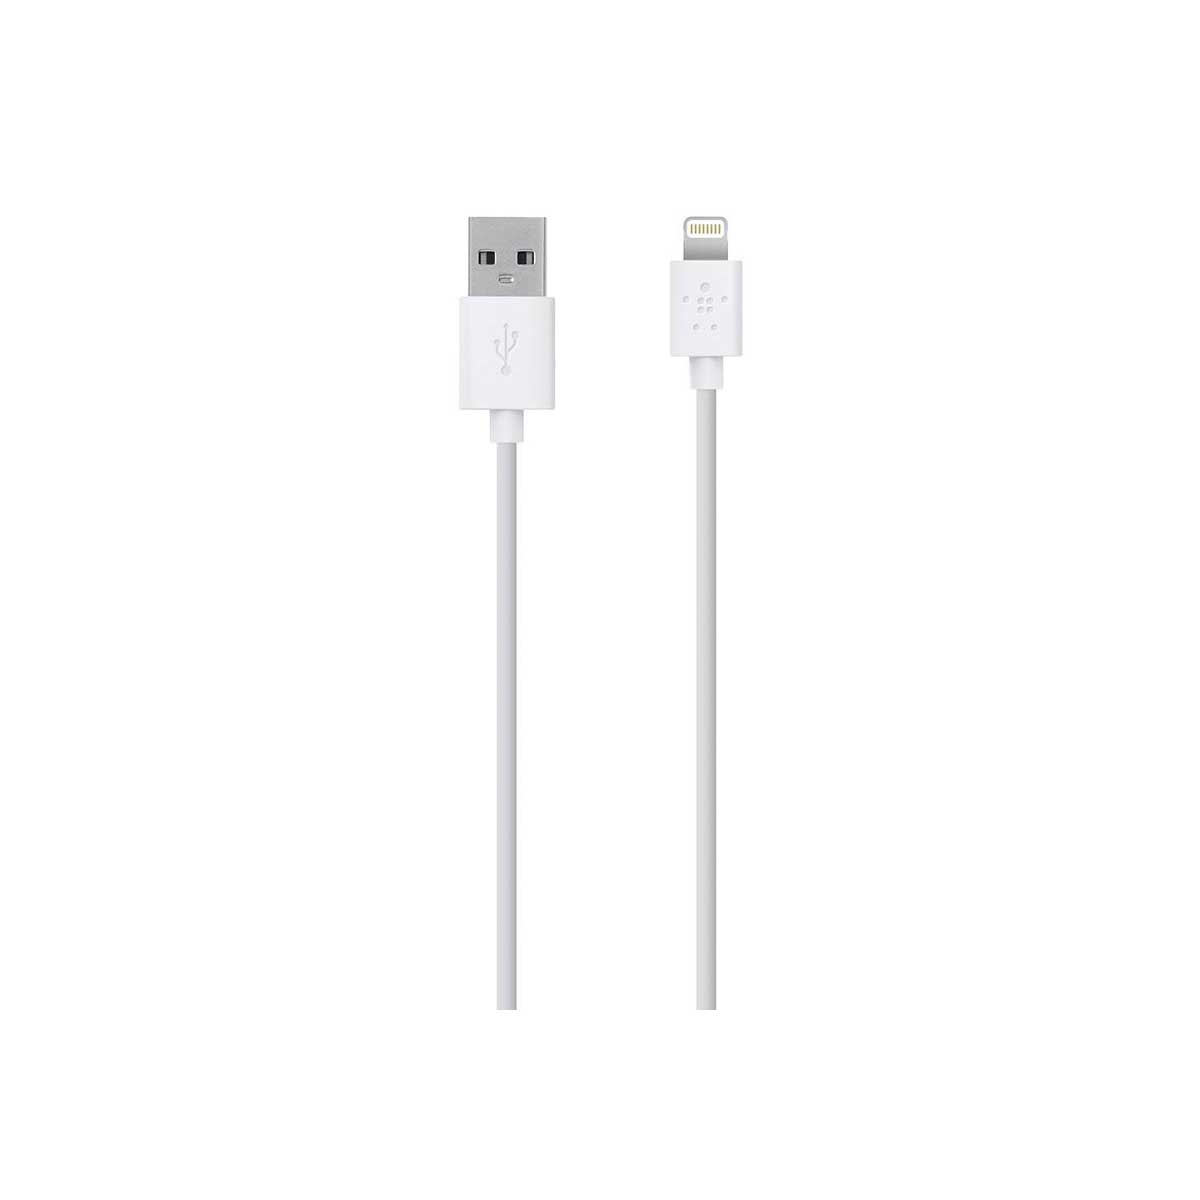 Belkin - MIXIT Lightning to USB Charge Sync Cable - White